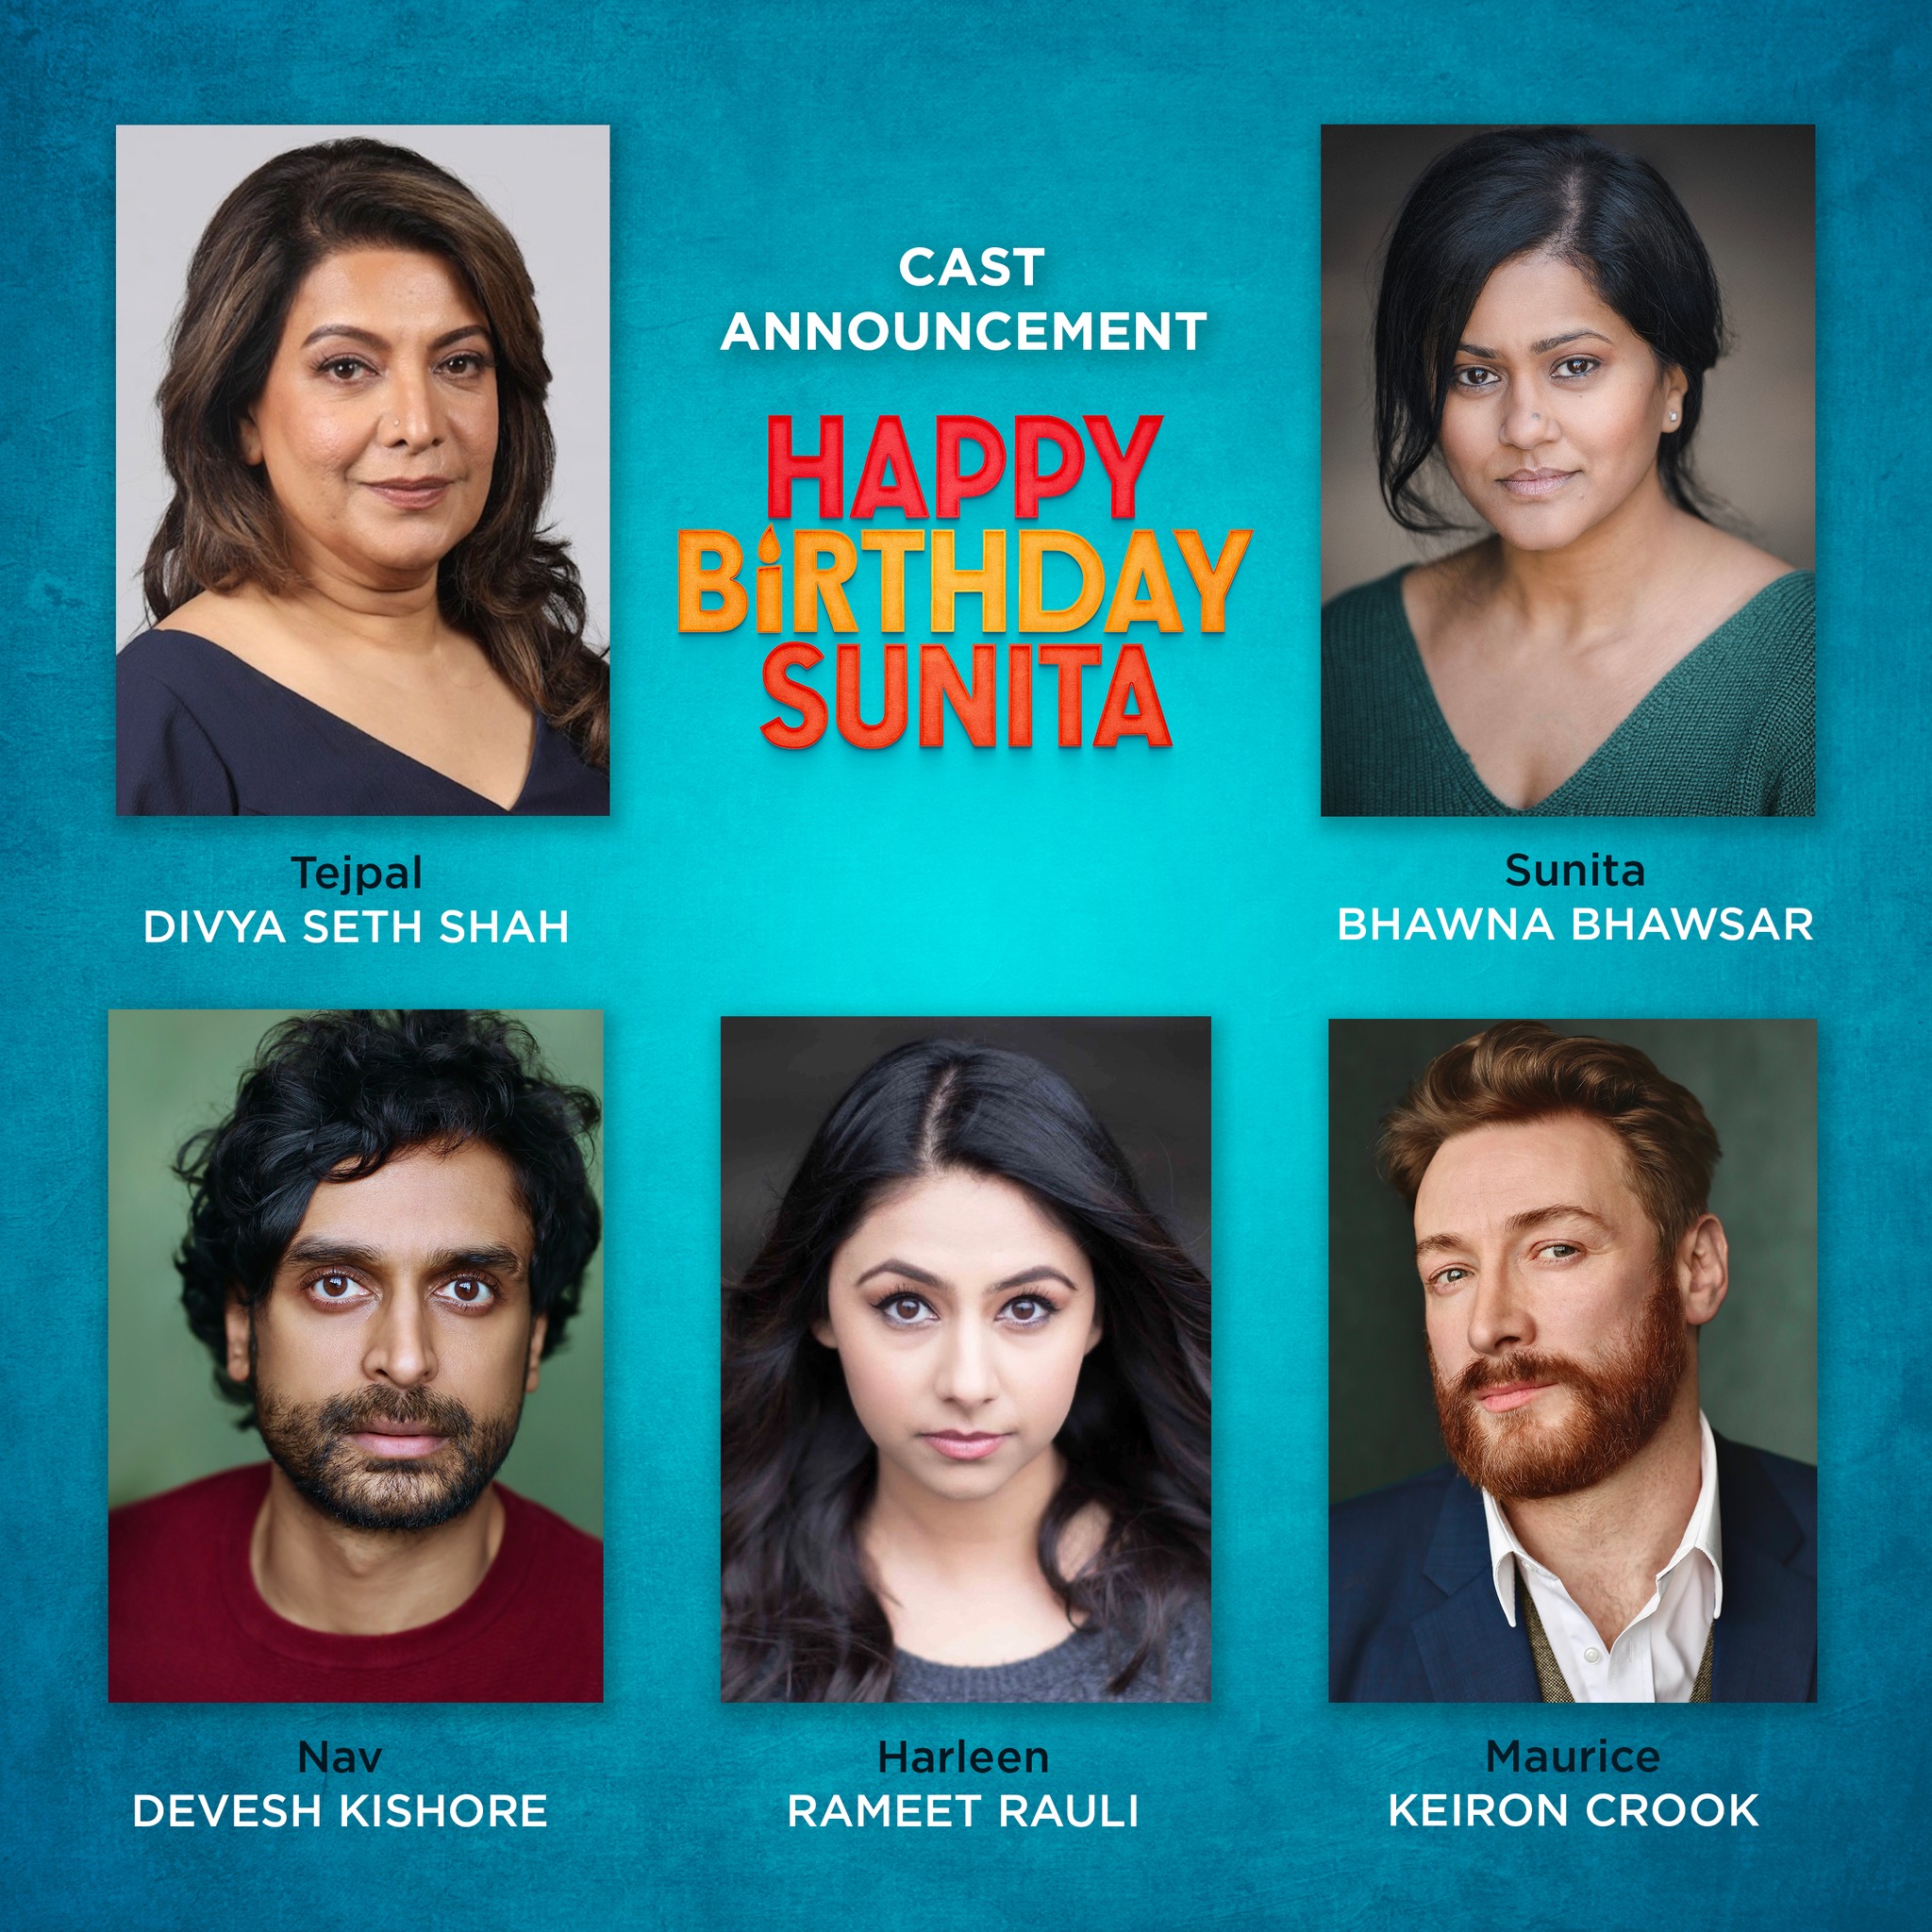 The party comes to town as raucous comedy drama Happy Birthday Sunita hits Hornchurch!